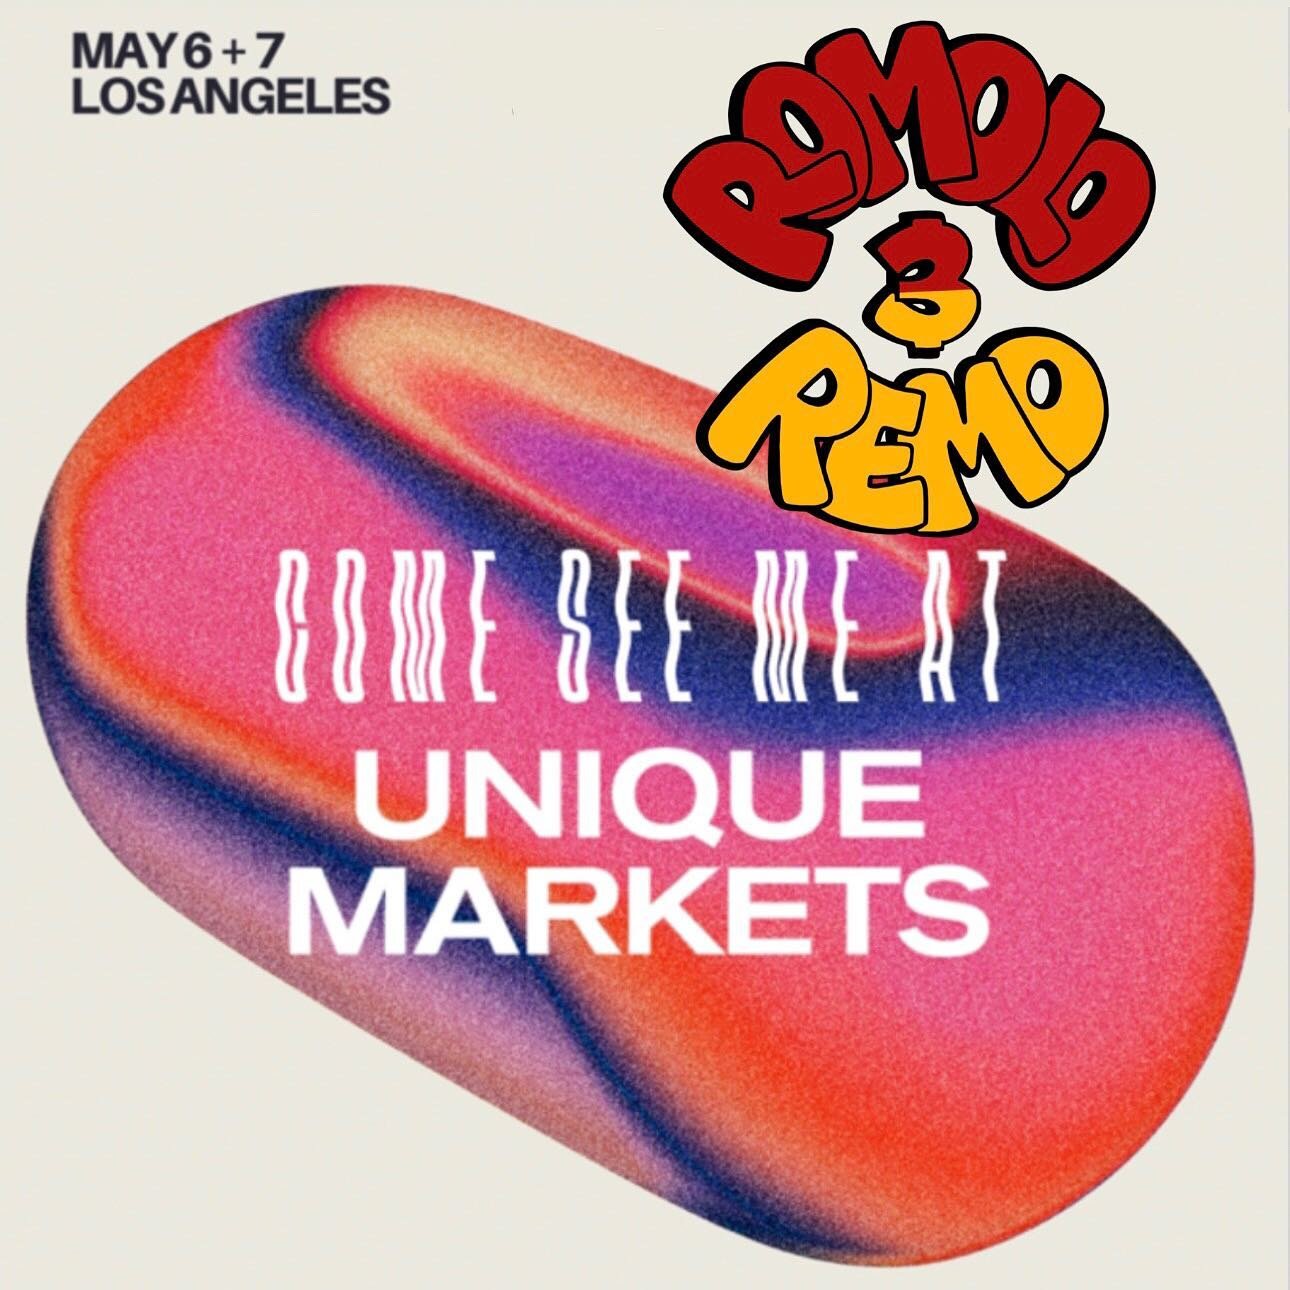 🚨 LOS ANGELES!! 🚨

@uniquemarkets is only 3 days away! 😱
Catch us at the @cmcdtla from 10am-4pm on both May 6th &amp; 7th for our good friends @uniquemarkets! We got all da samples featuring the best sourdough focaccia by @papafocaccia, super fun 